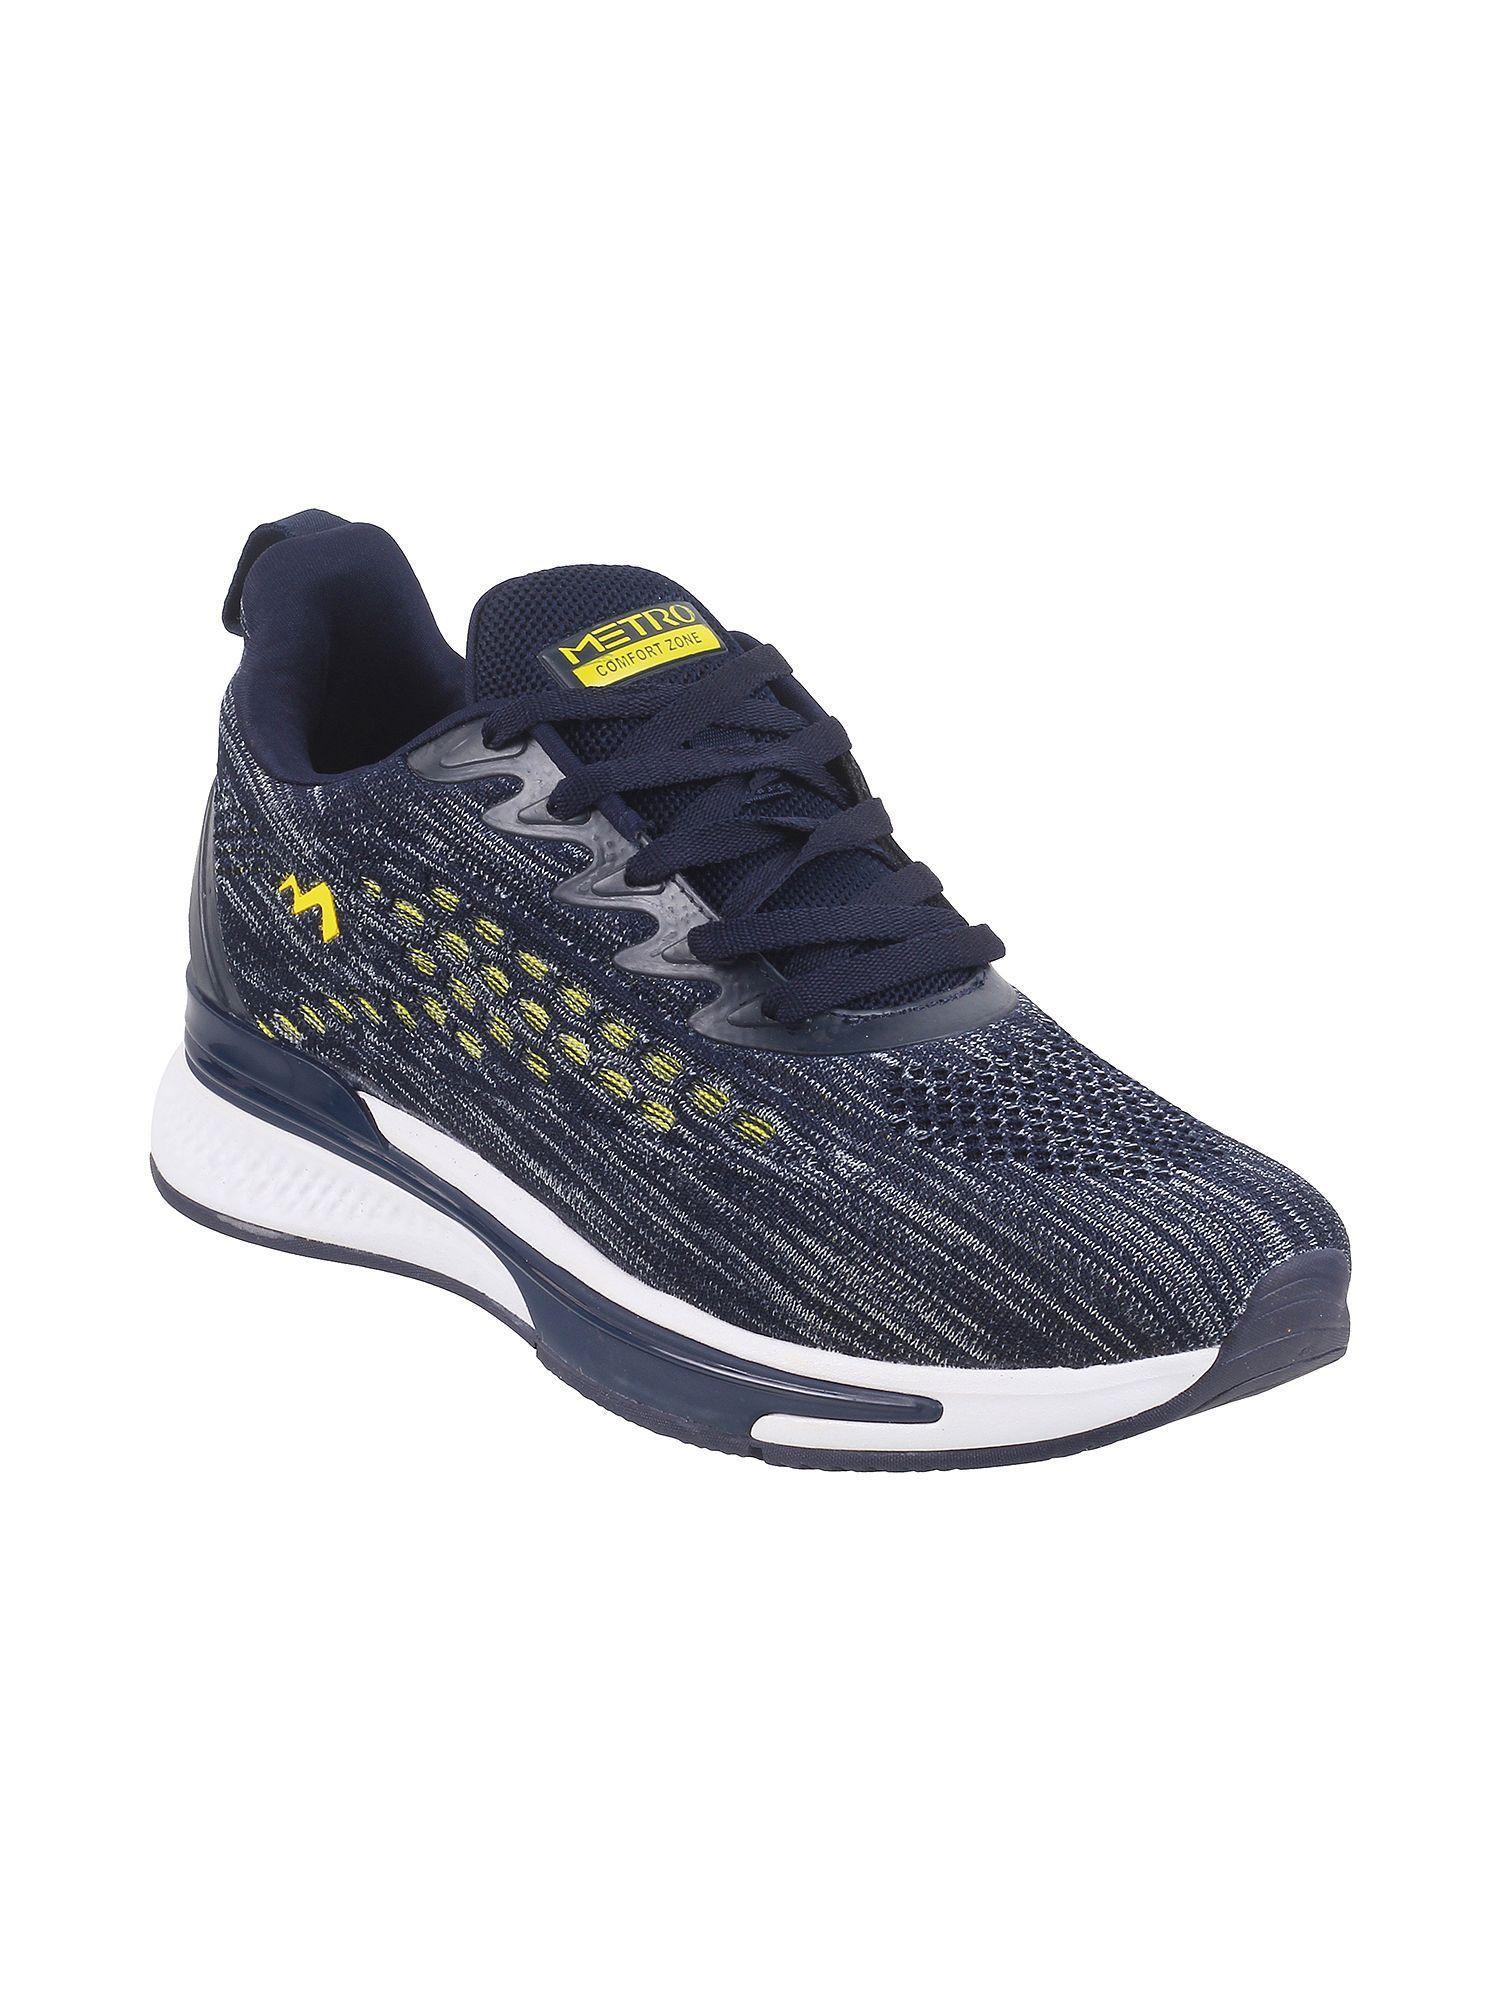 men-sports-synthetic-navy-blue-walking-shoes